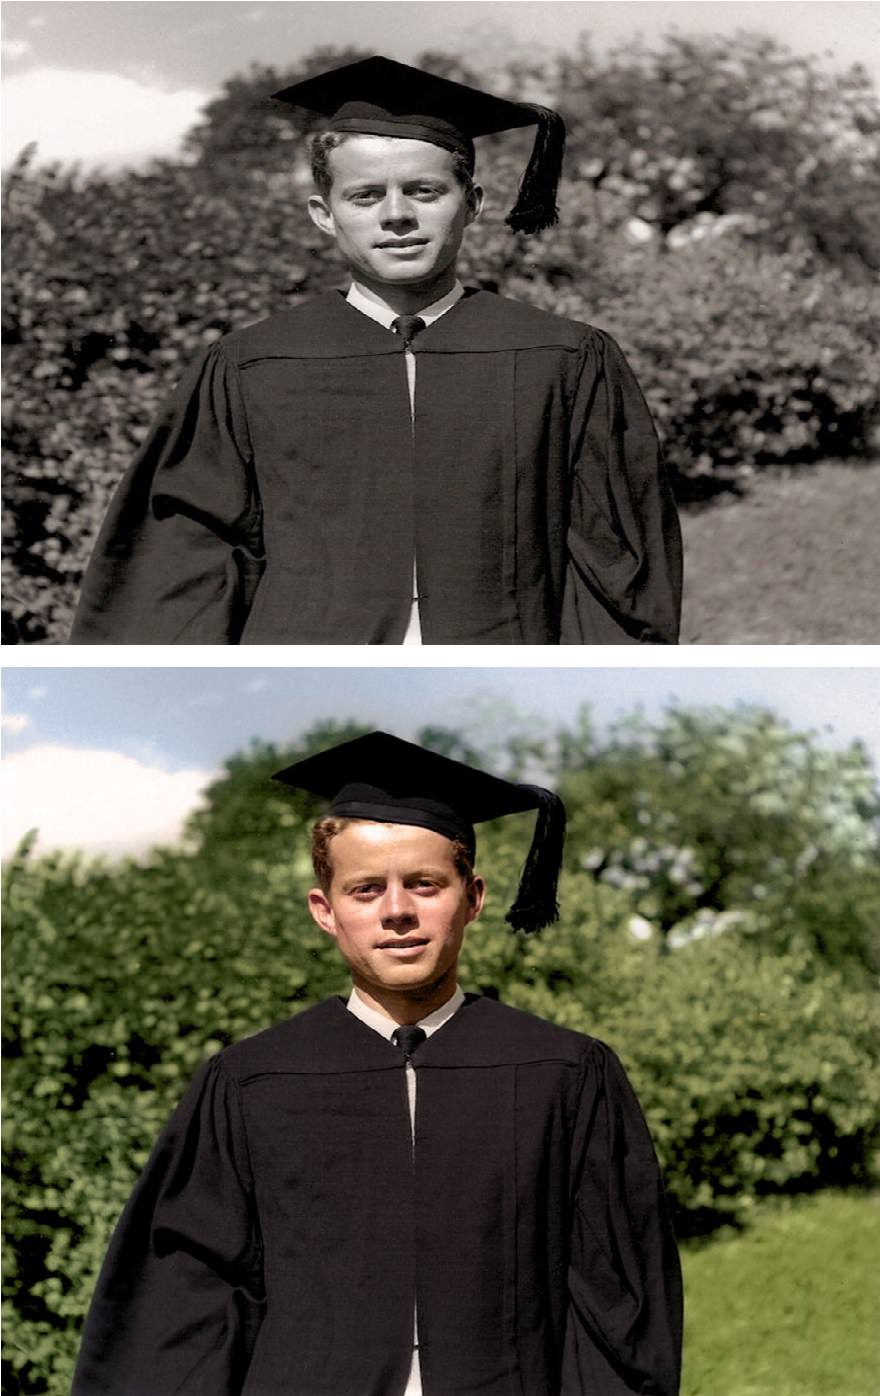 A young John F. Kennedy immediately after his graduation from Harvard, in the summer of 1940